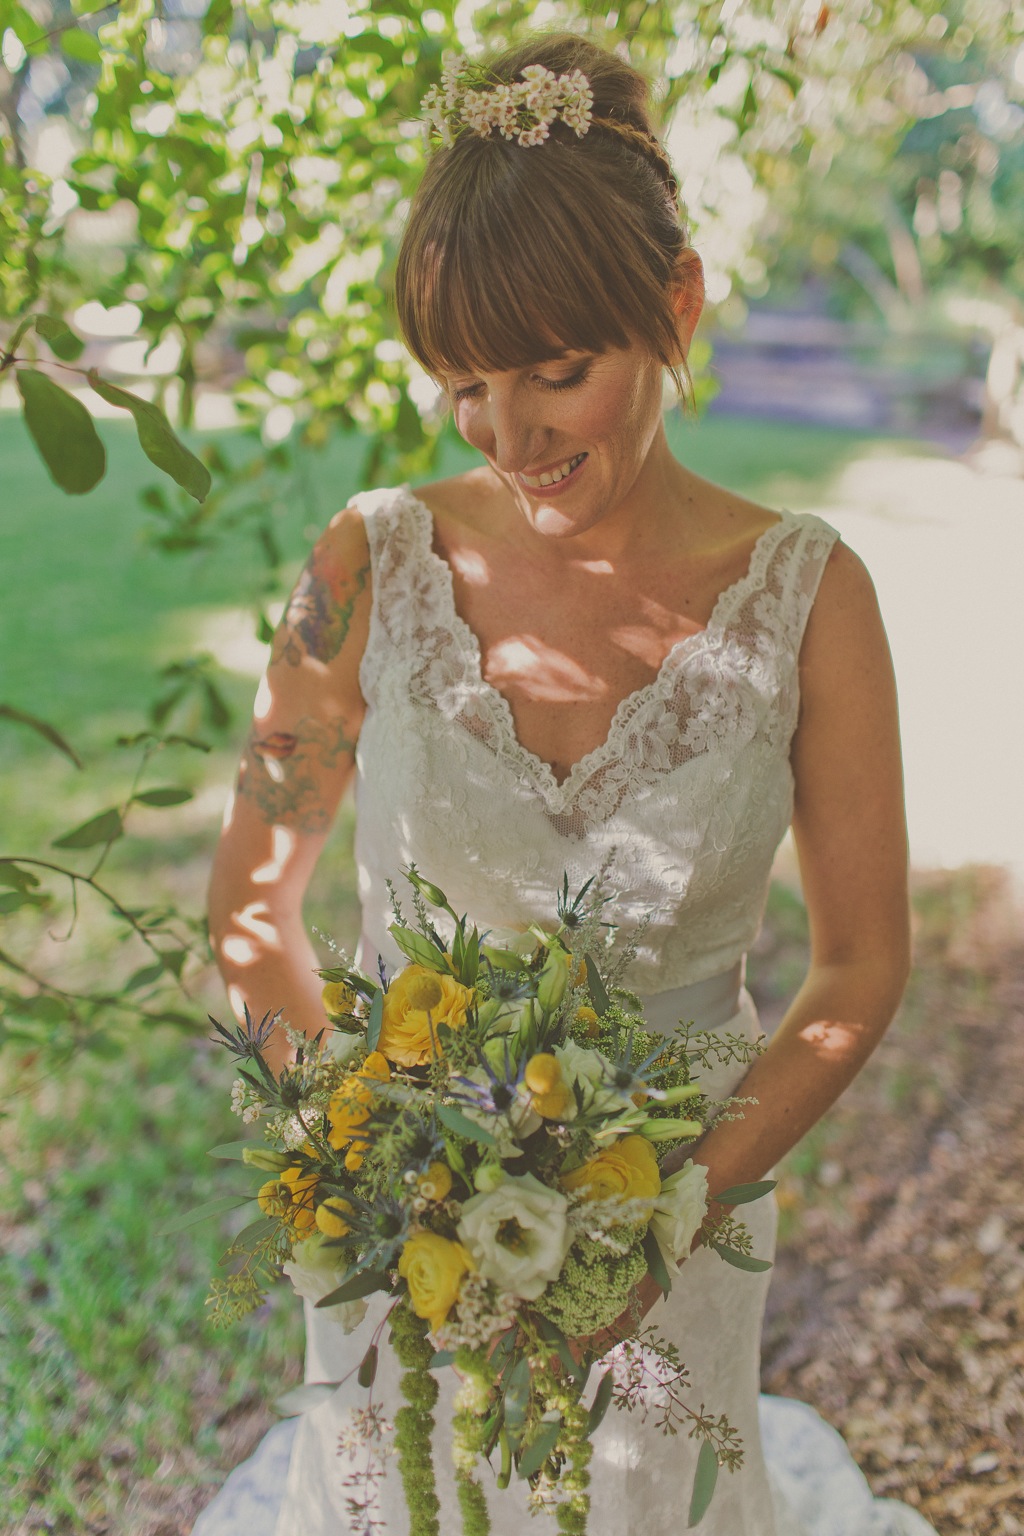 Lace Wedding Dress - Rustic Tattoo Bride with Yellow Wedding Bouquet